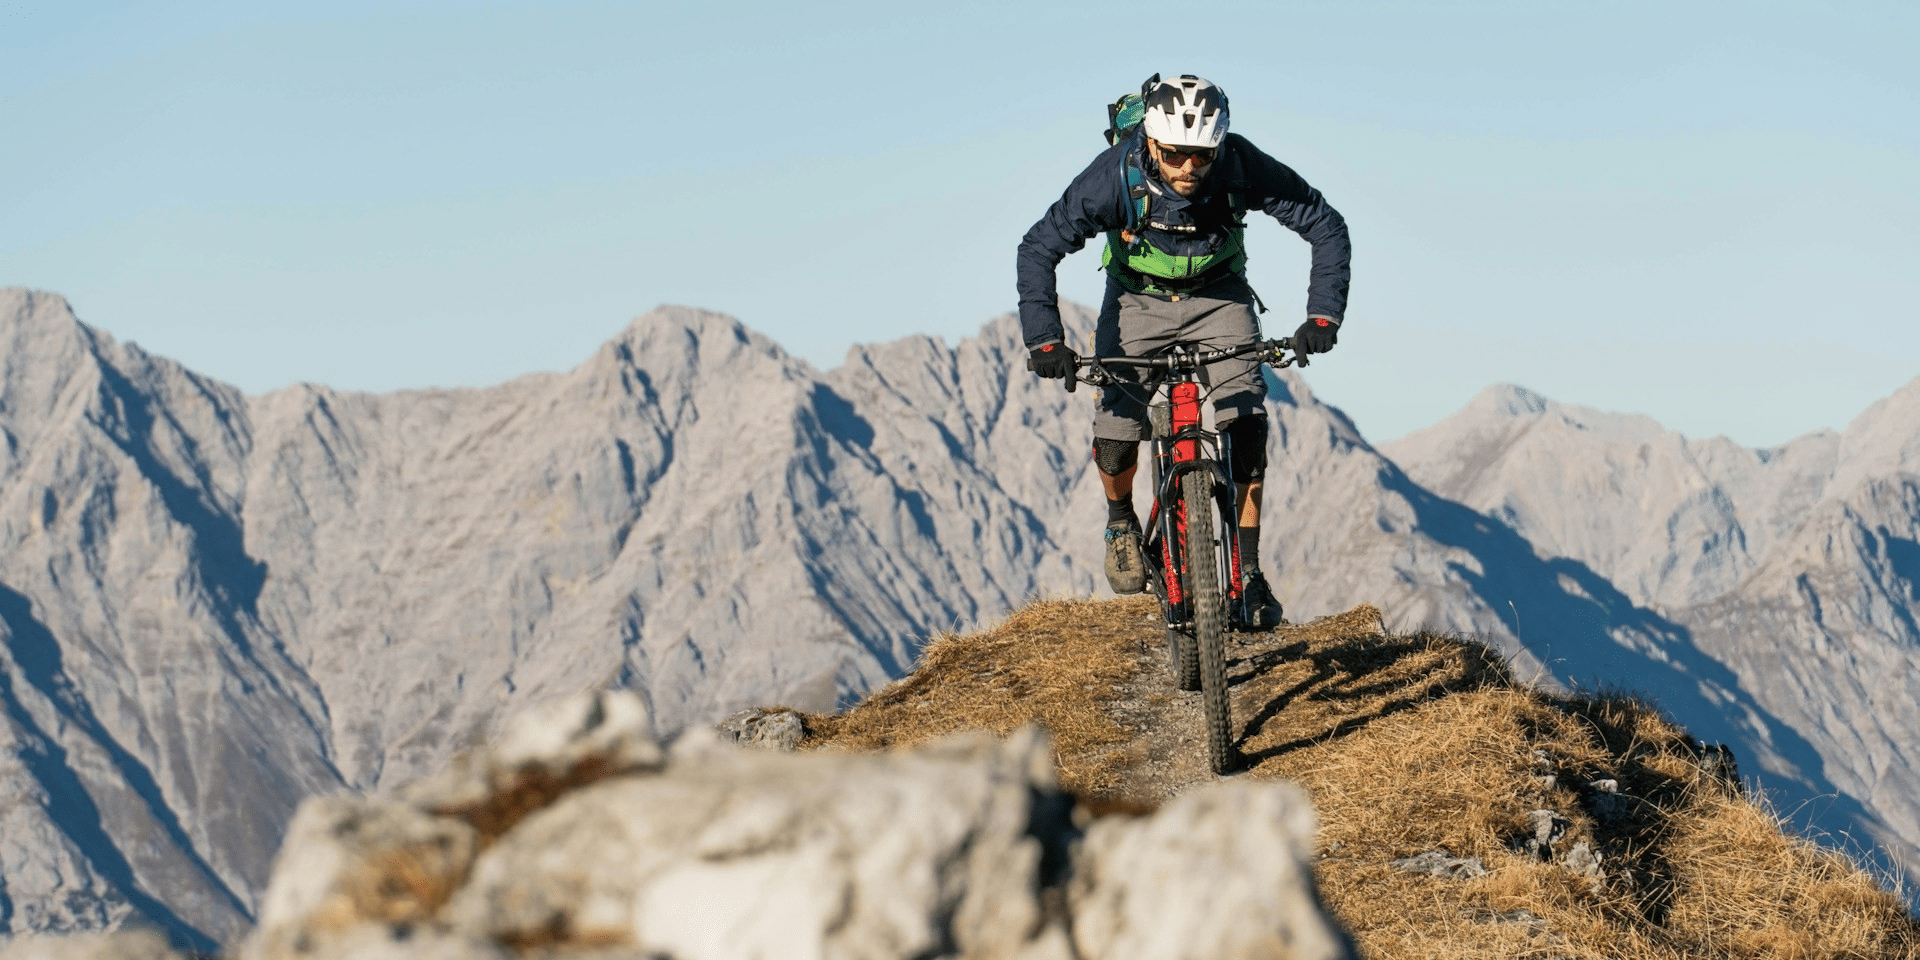 The Thrill and Dangers of Mountain Biking